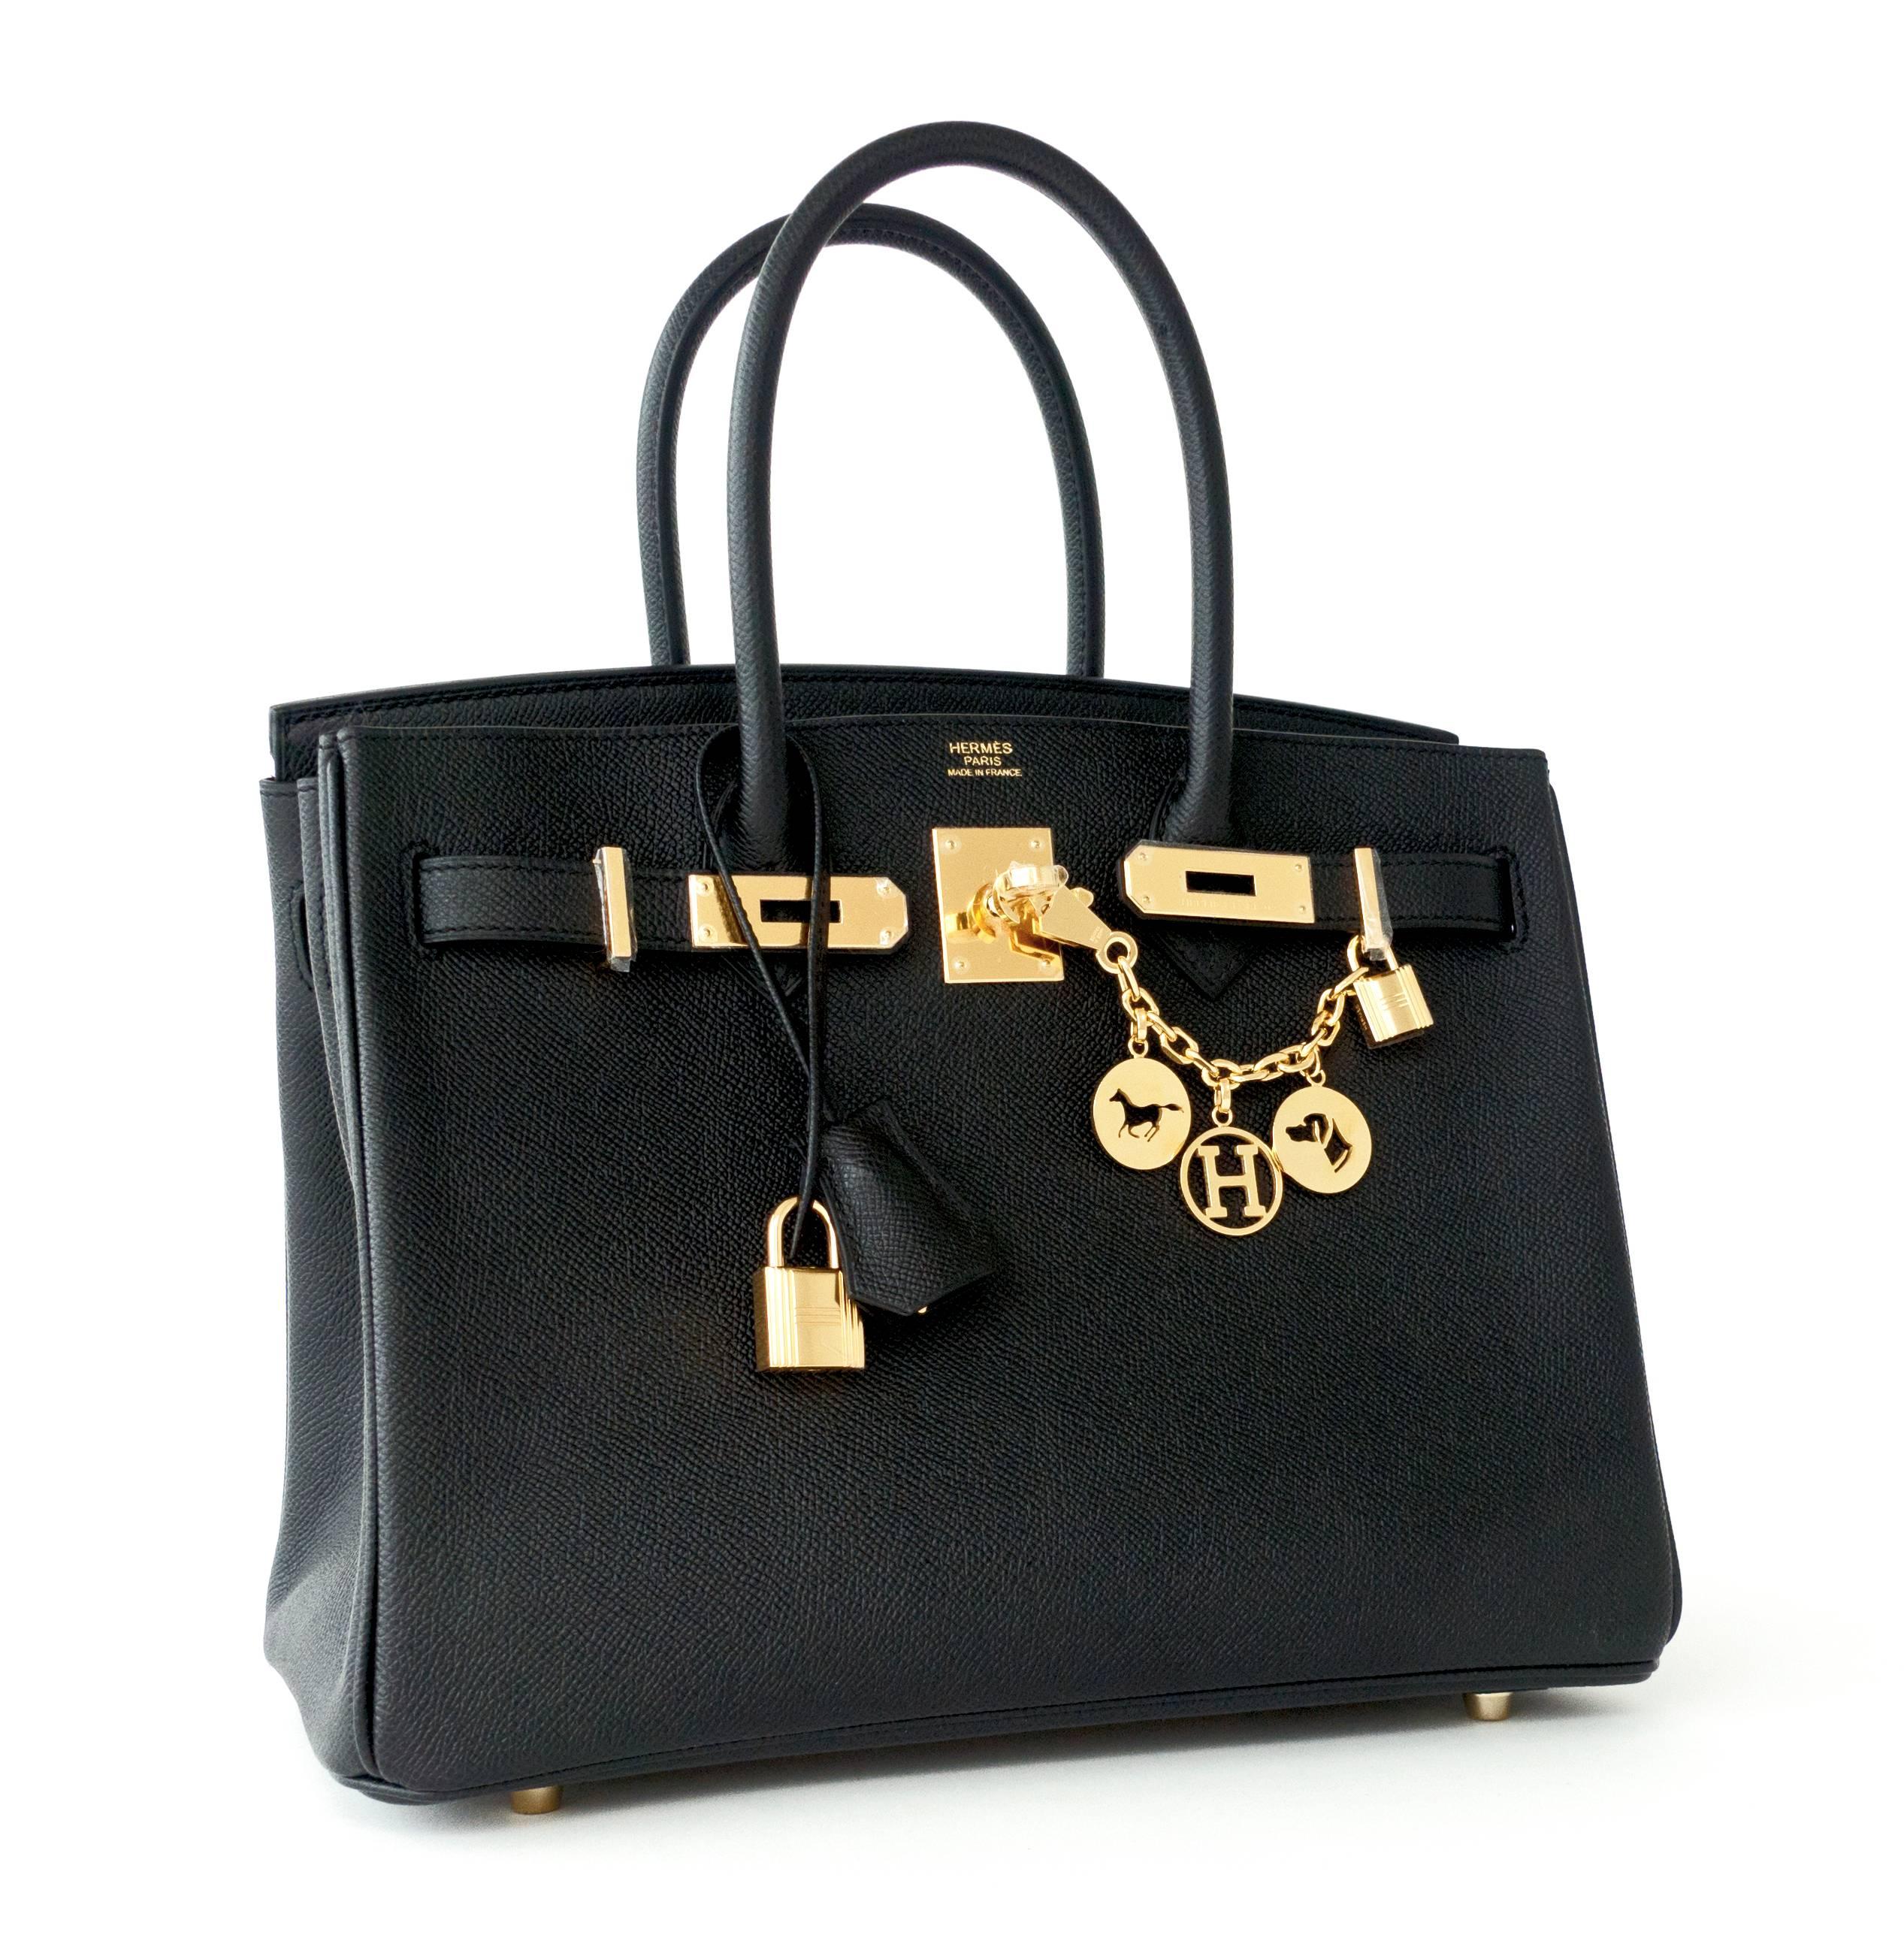 Hermes Black 30cm Birkin Epsom Gold Hardware GHW Satchel Bag Sophisticated
Just purchased from Hermes store; bag bears new interior 2019 D stamp.
Store fresh.  Pristine Condition (with plastic on hardware)
Comes with keys, lock, clochette, a sleeper